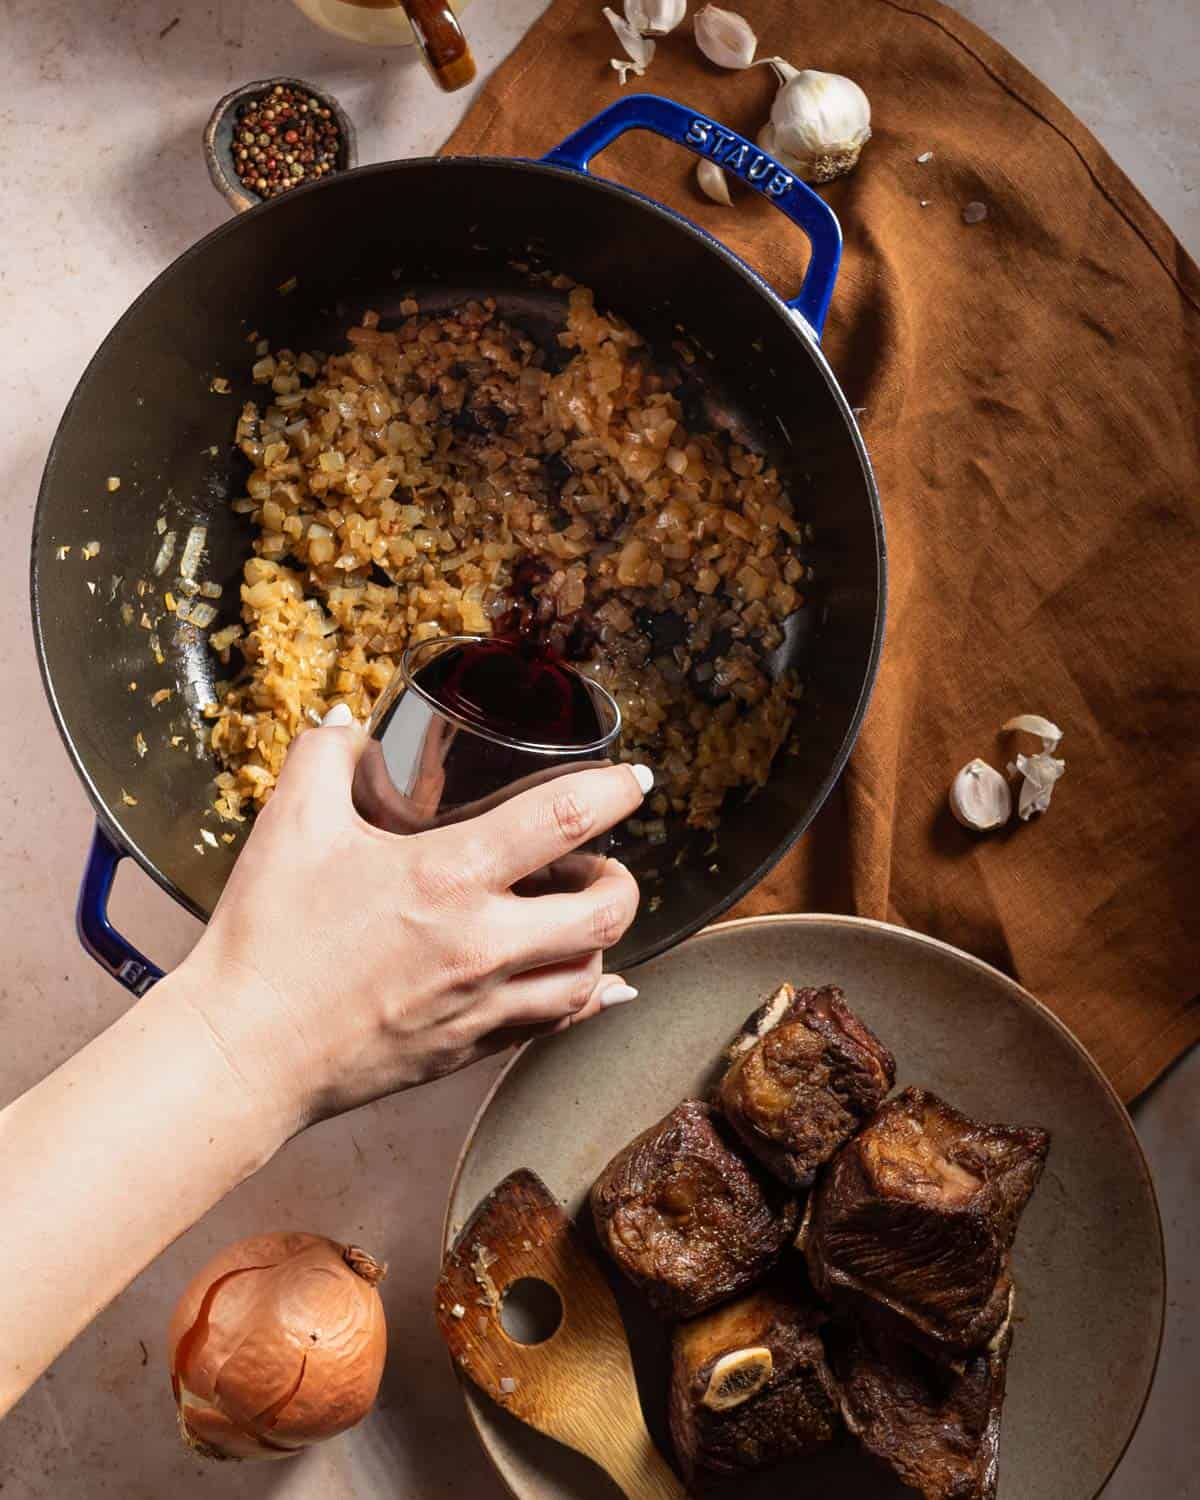 Adding red wine to deglaze a pot of sautéed onions next to a plate of seared short ribs.